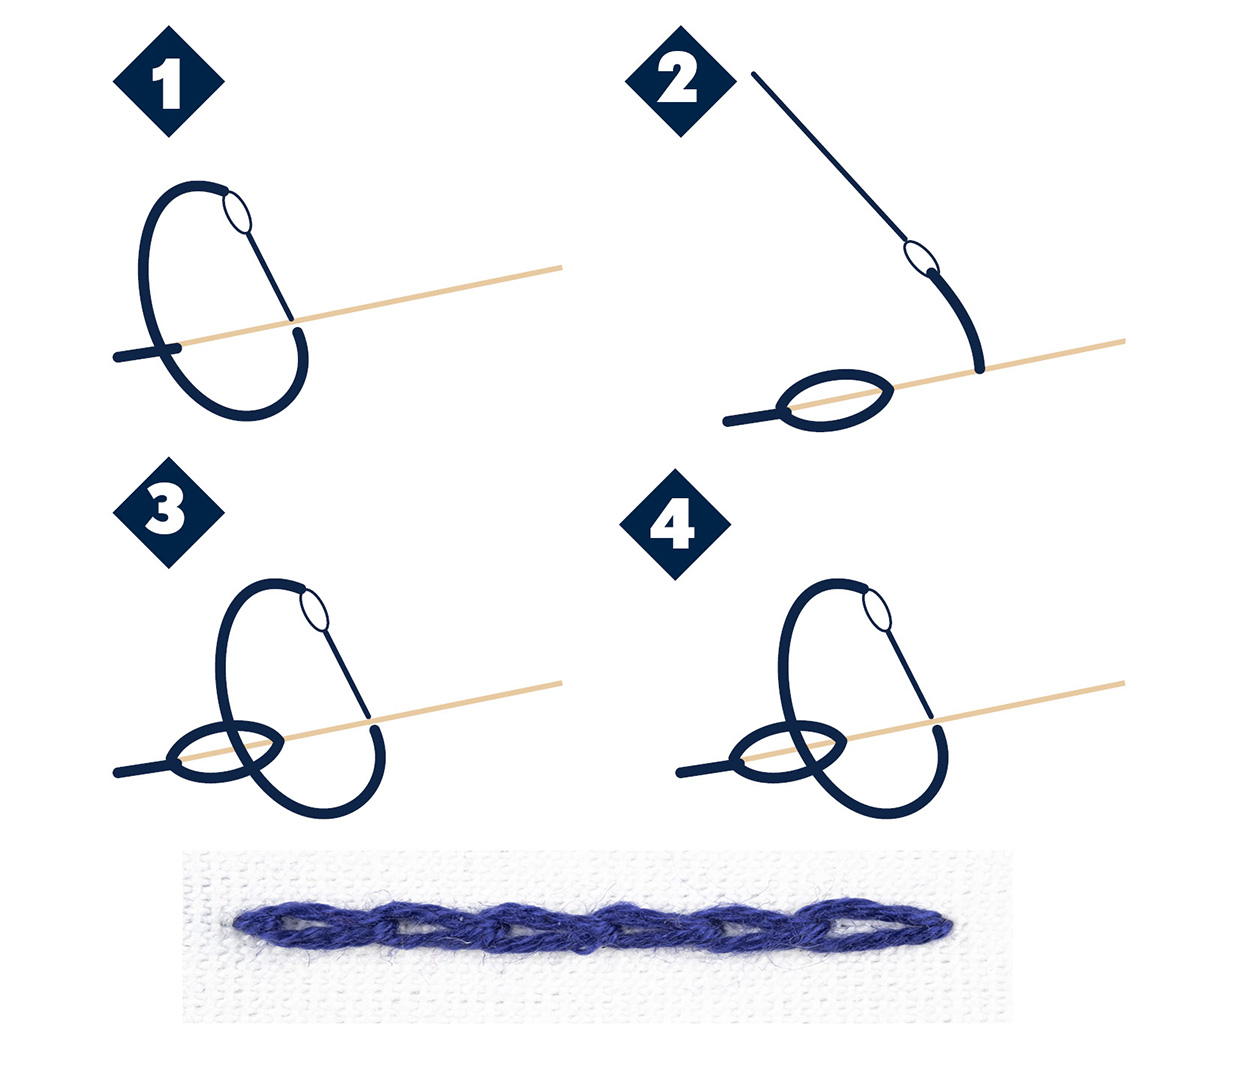 graphic demonstrating a chain stitch